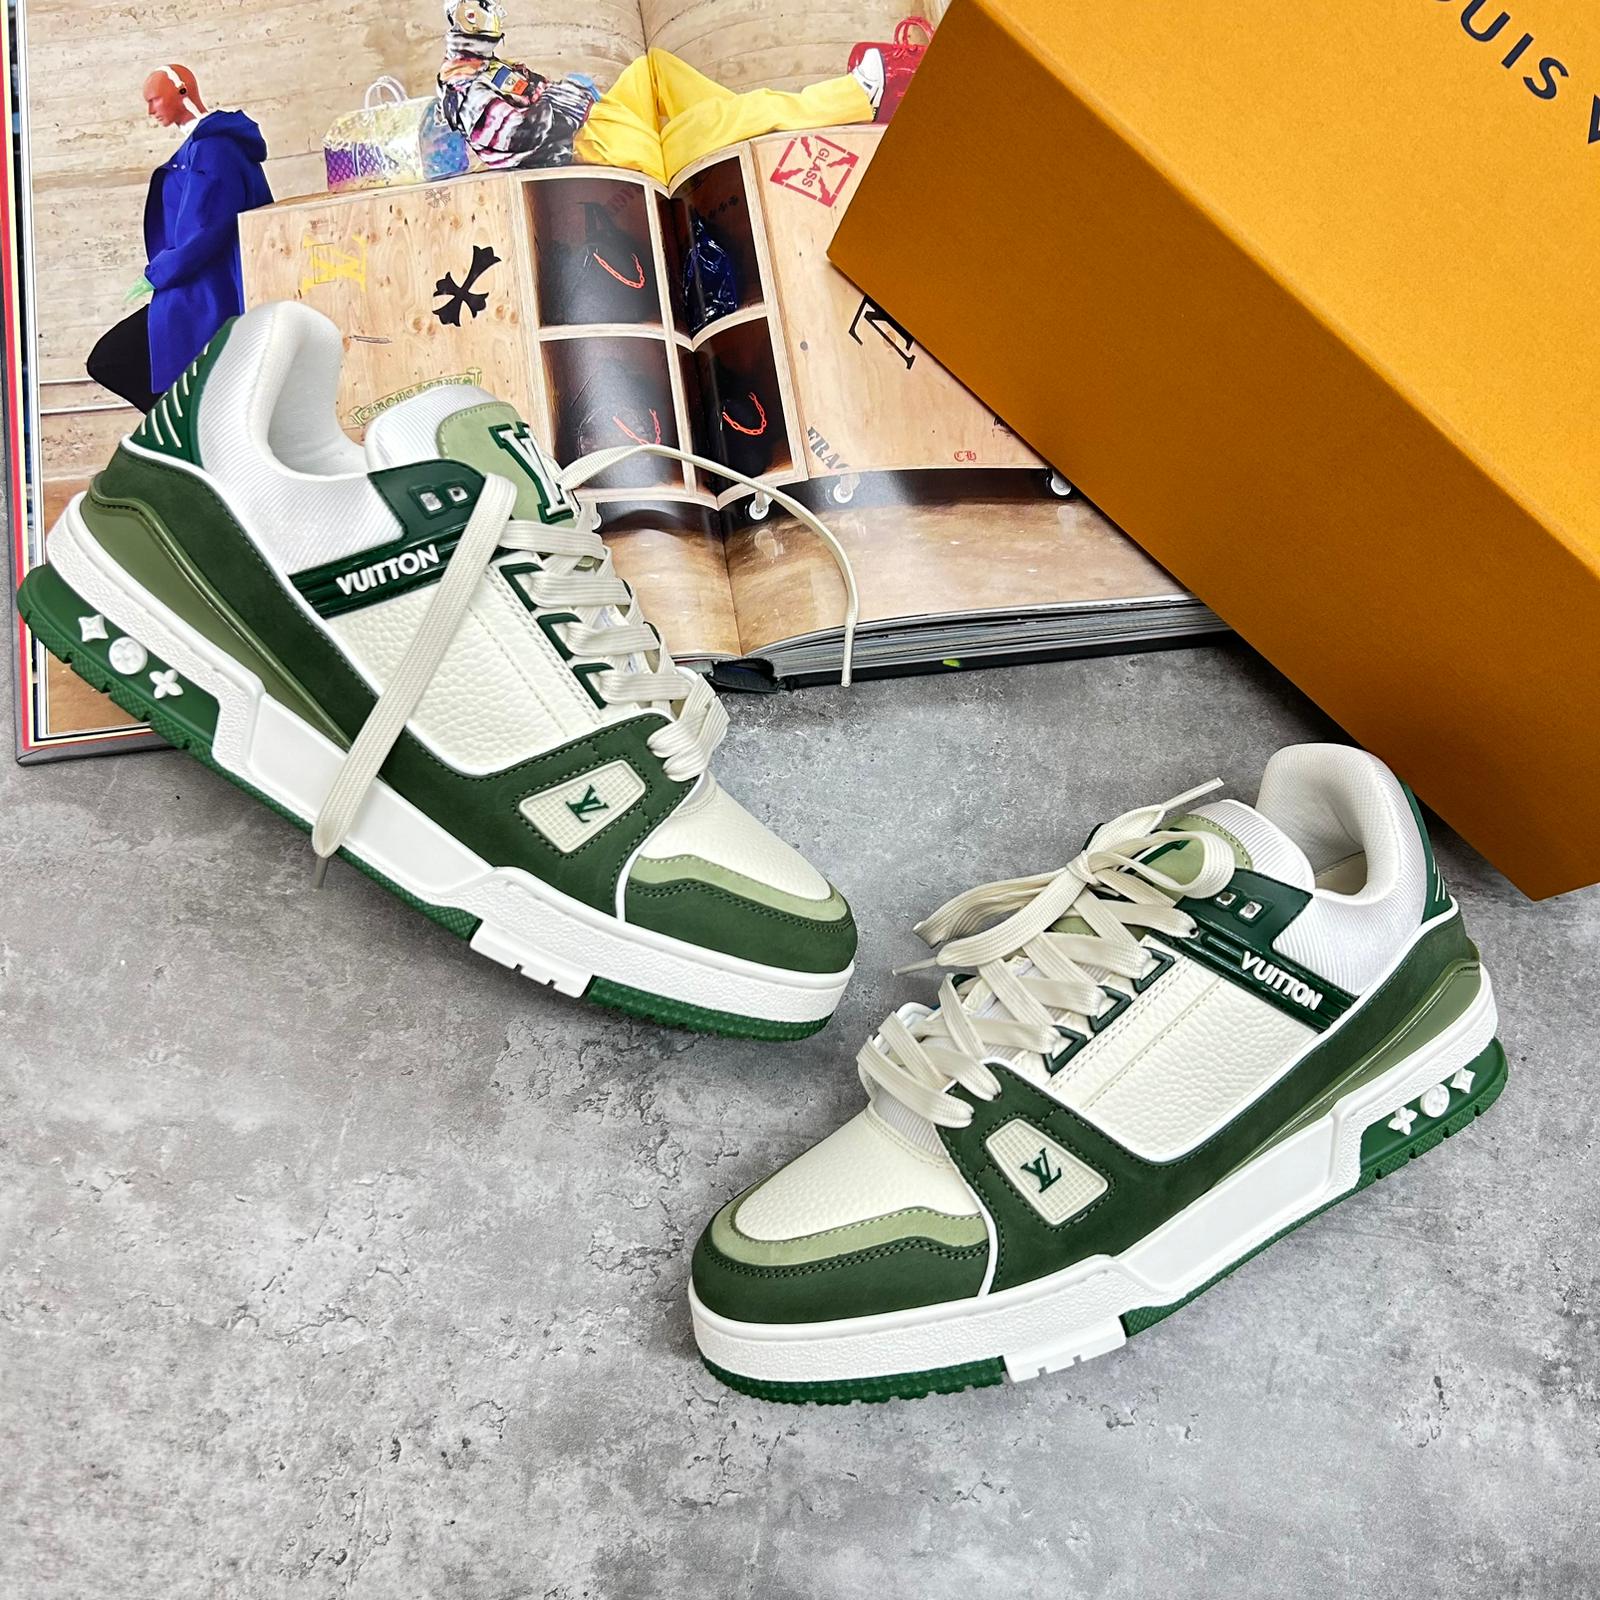 LOUIS VUITTON - TRAINERS - GREEN/WHITE